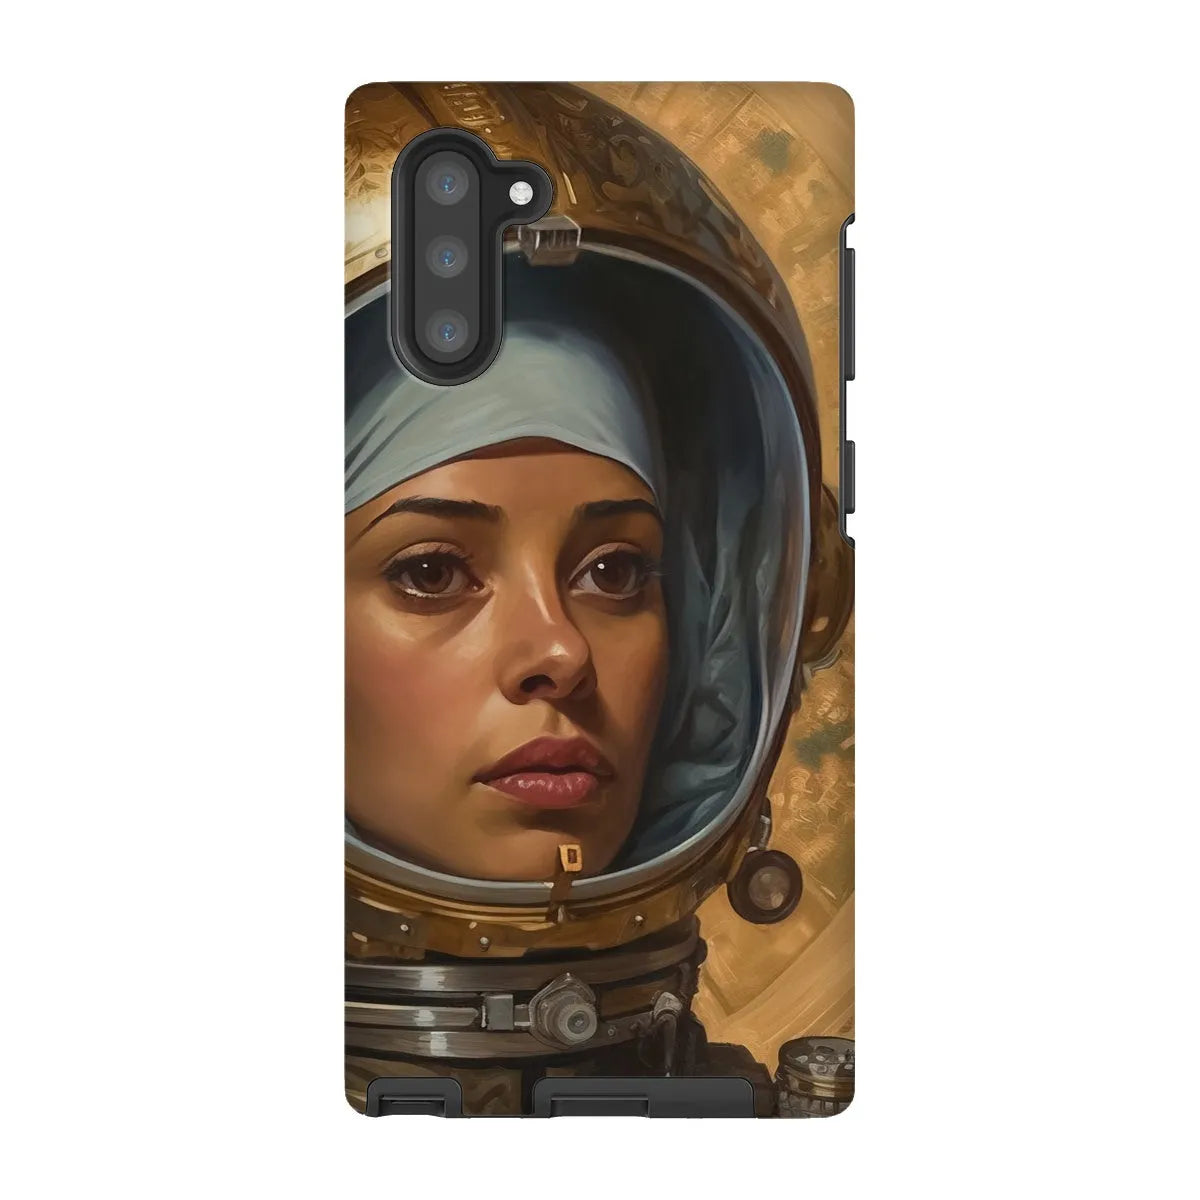 Amira The Lesbian Astronaut - Sapphic Aesthetic Phone Case - Samsung Galaxy Note 10 / Matte - Mobile Phone Cases